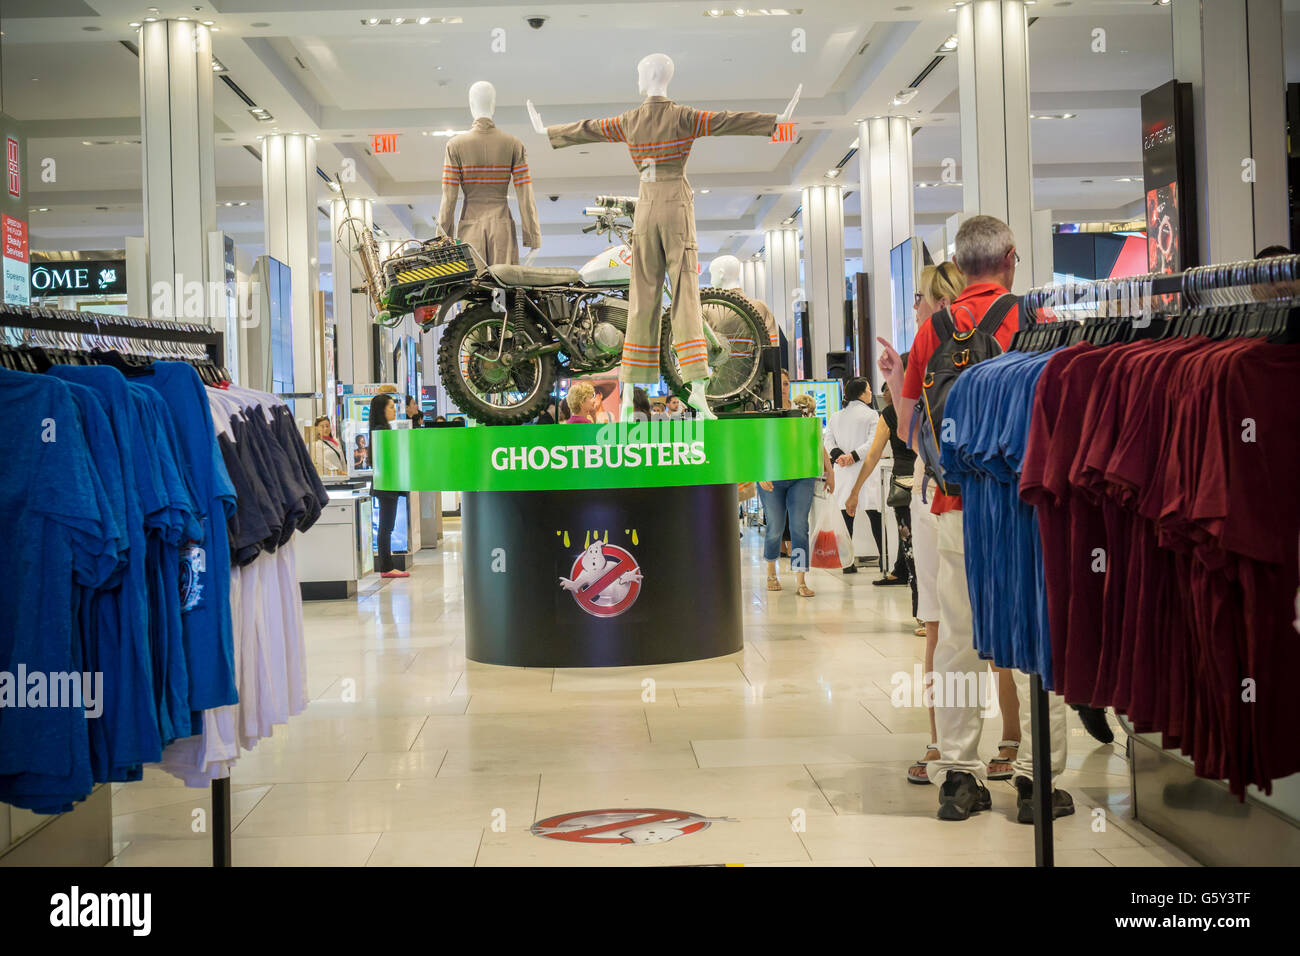 A promotional display for 'Ghostbusters' merchandise is seen in Macy's Herald Square department store in New York on Friday, June 17, 2016. The new Columbia Pictures  'Ghostbusters', which has an all women cast and is not a sequel to the 1984 movie, is scheduled to open on July 15. (© Richard B. Levine) Stock Photo